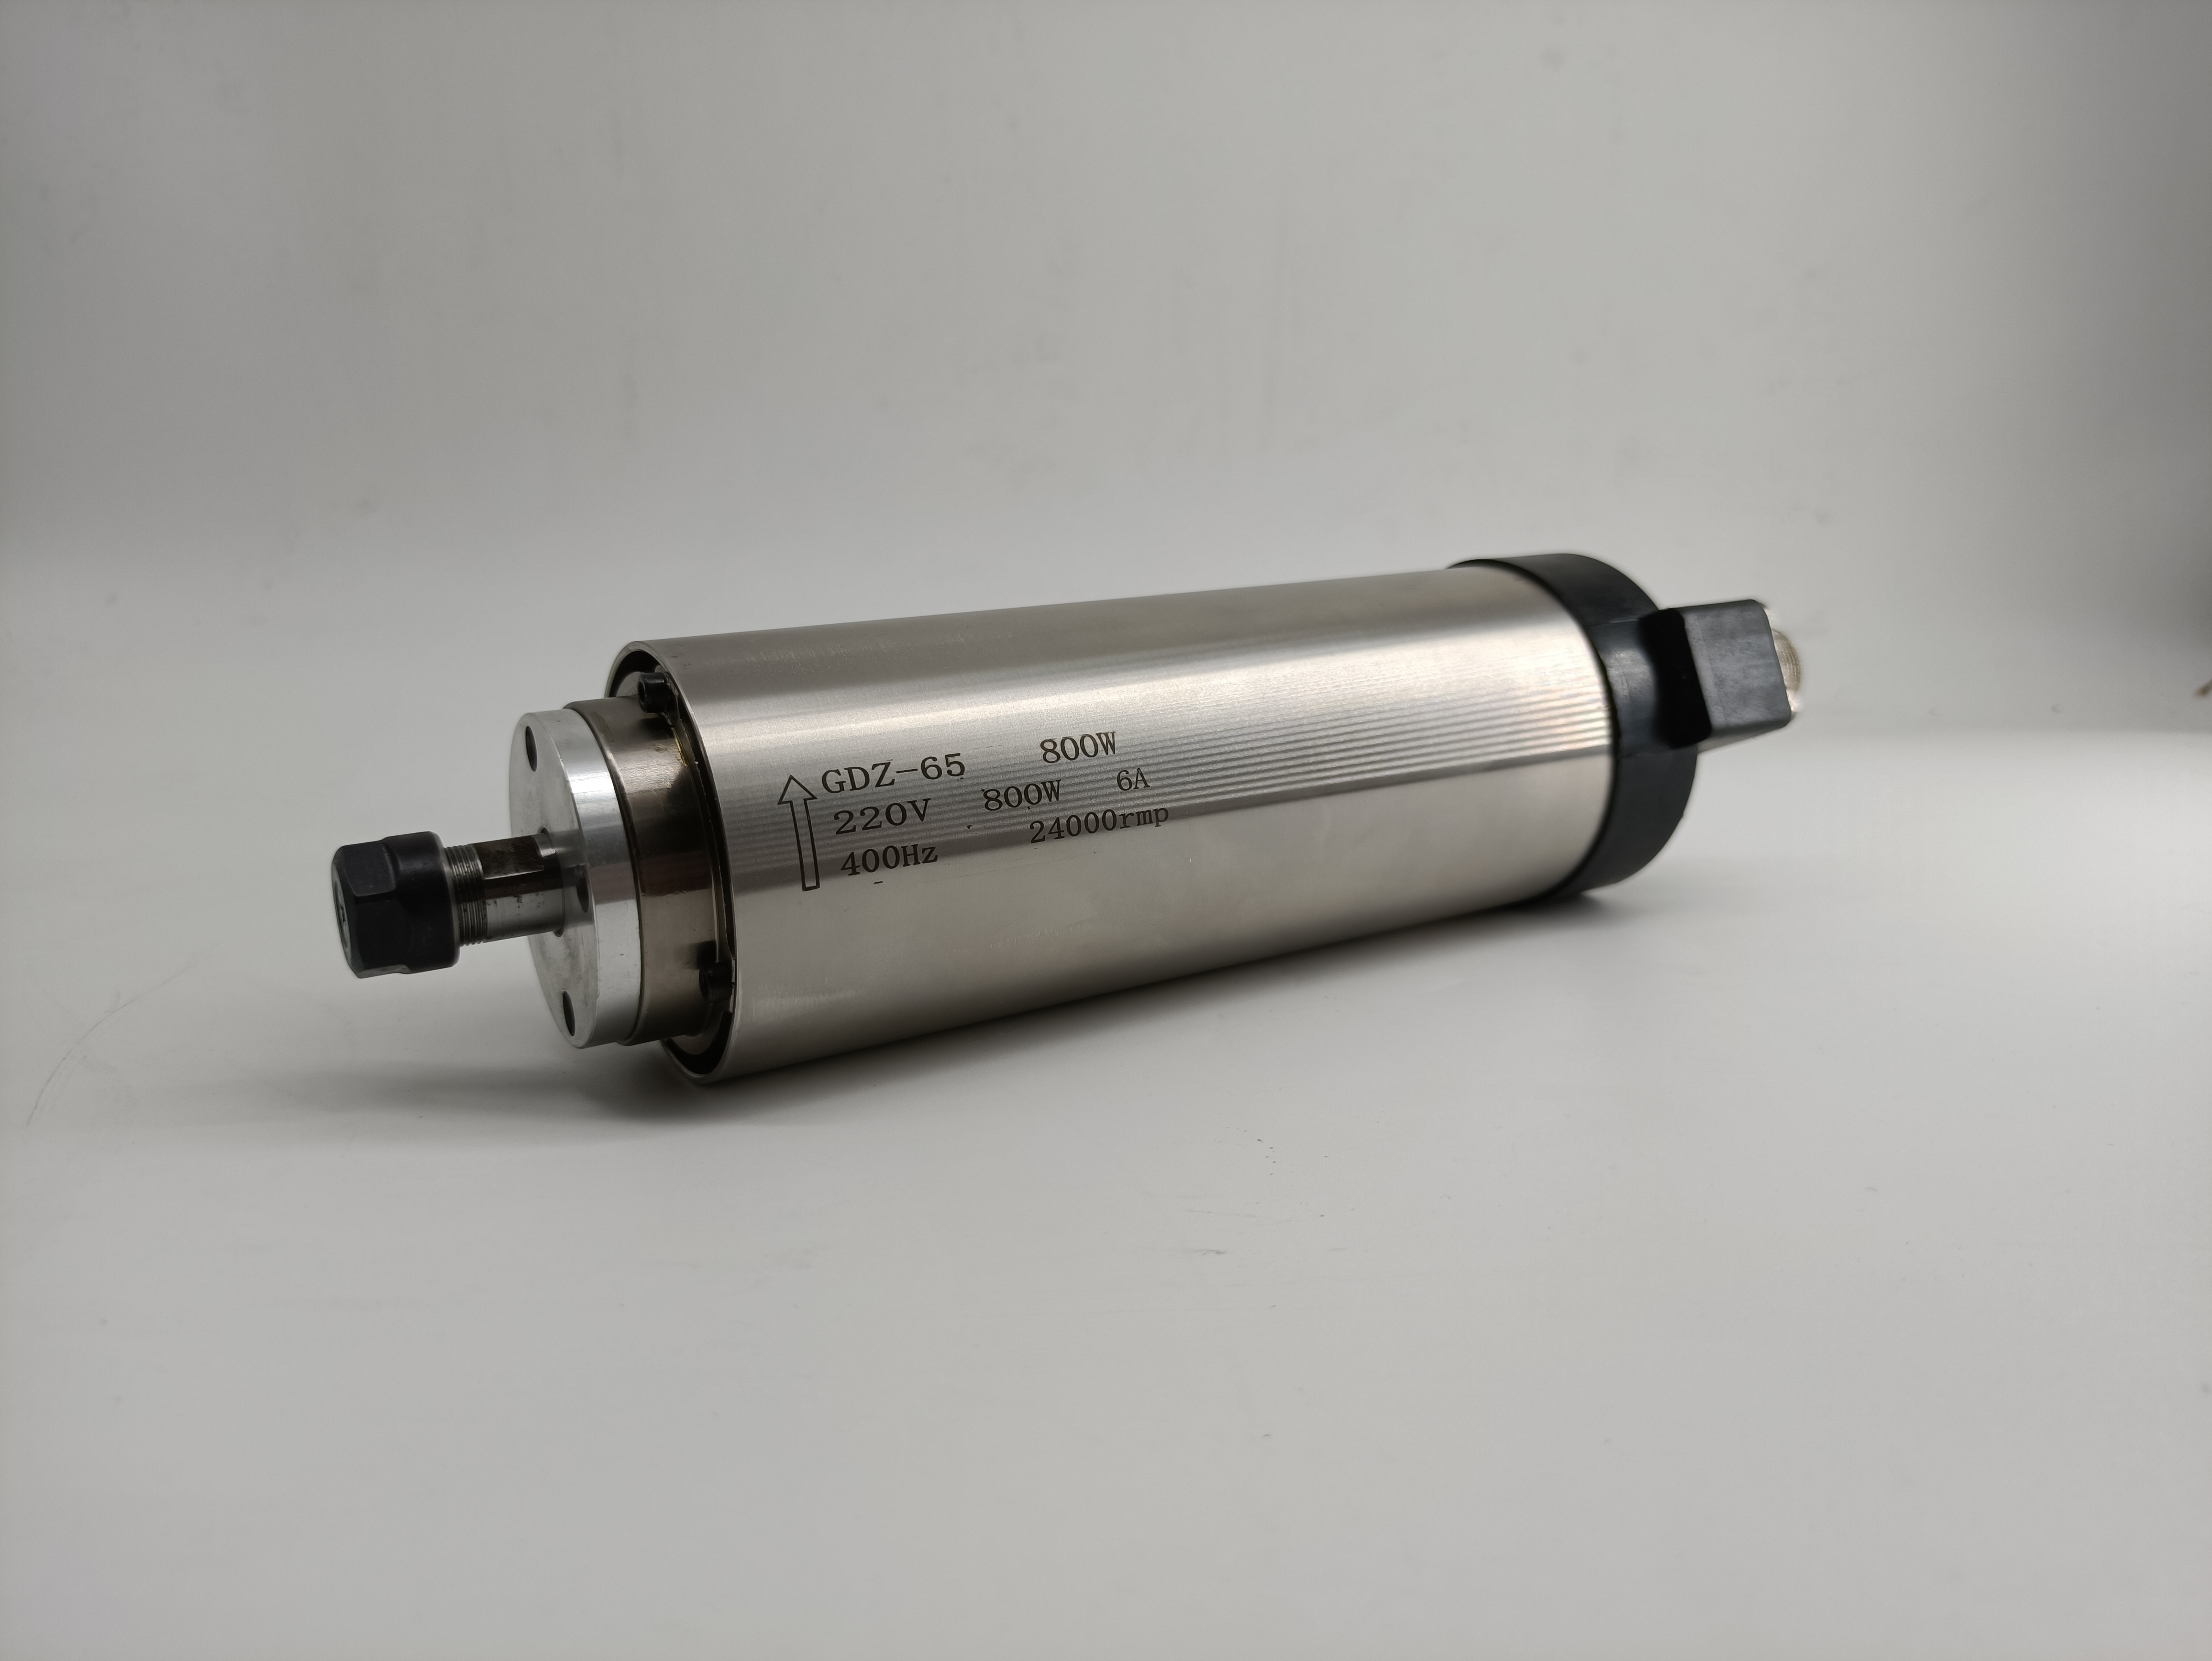 HOLRY CNC Spindle Motor for Wood Metal Milling Air Cooled 220V 24000RPM High Quality Spindle Motor 